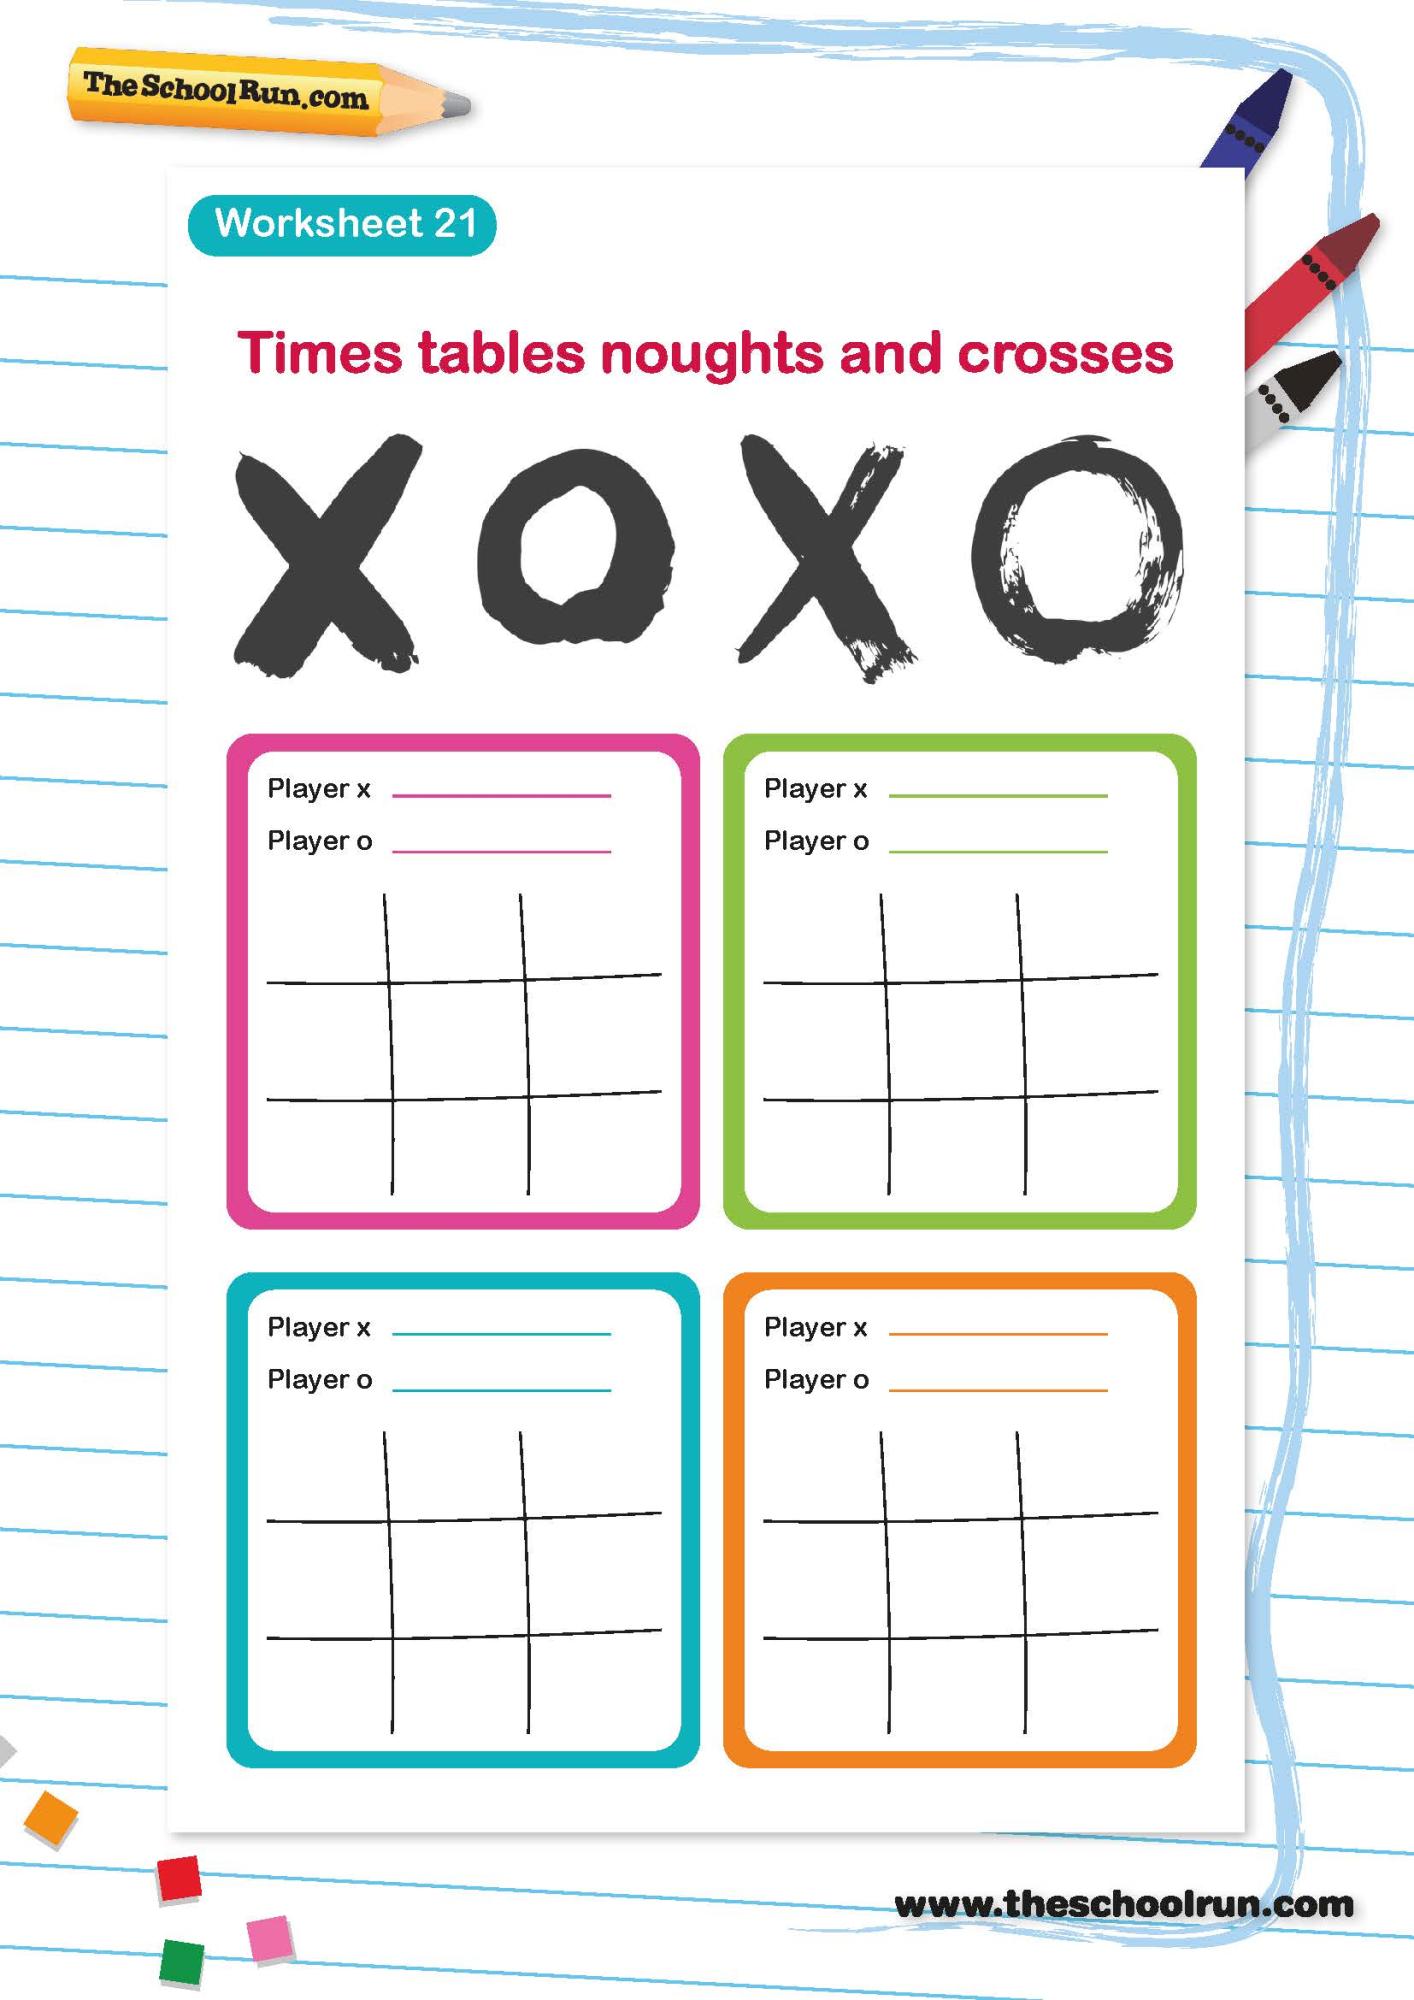 Times tables 4